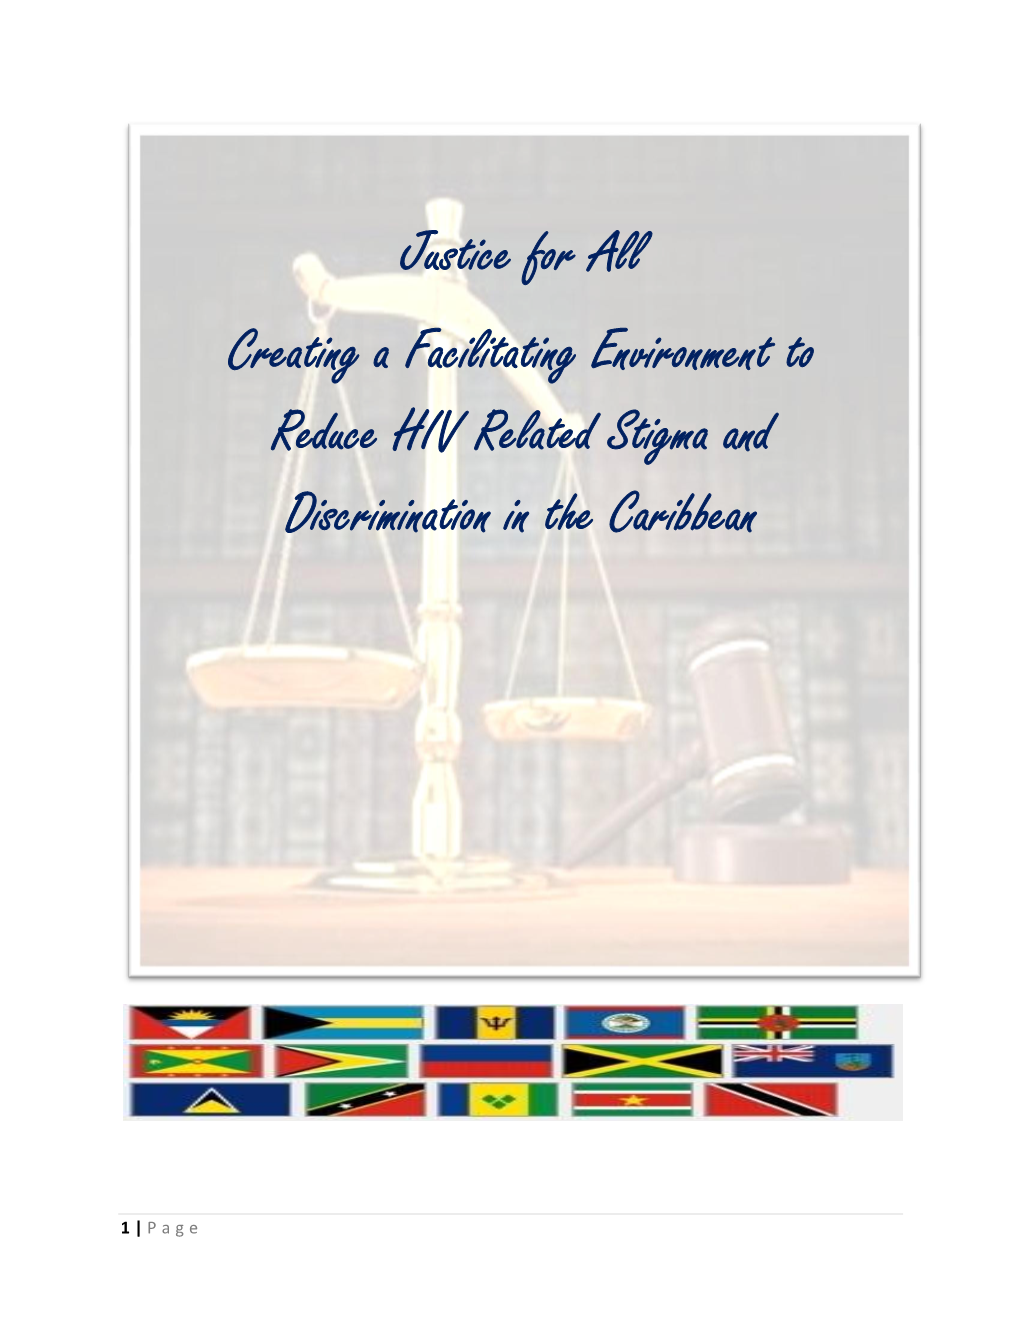 Justice for All Creating a Facilitating Environment to Reduce HIV Related Stigma and Discrimination in the Caribbean